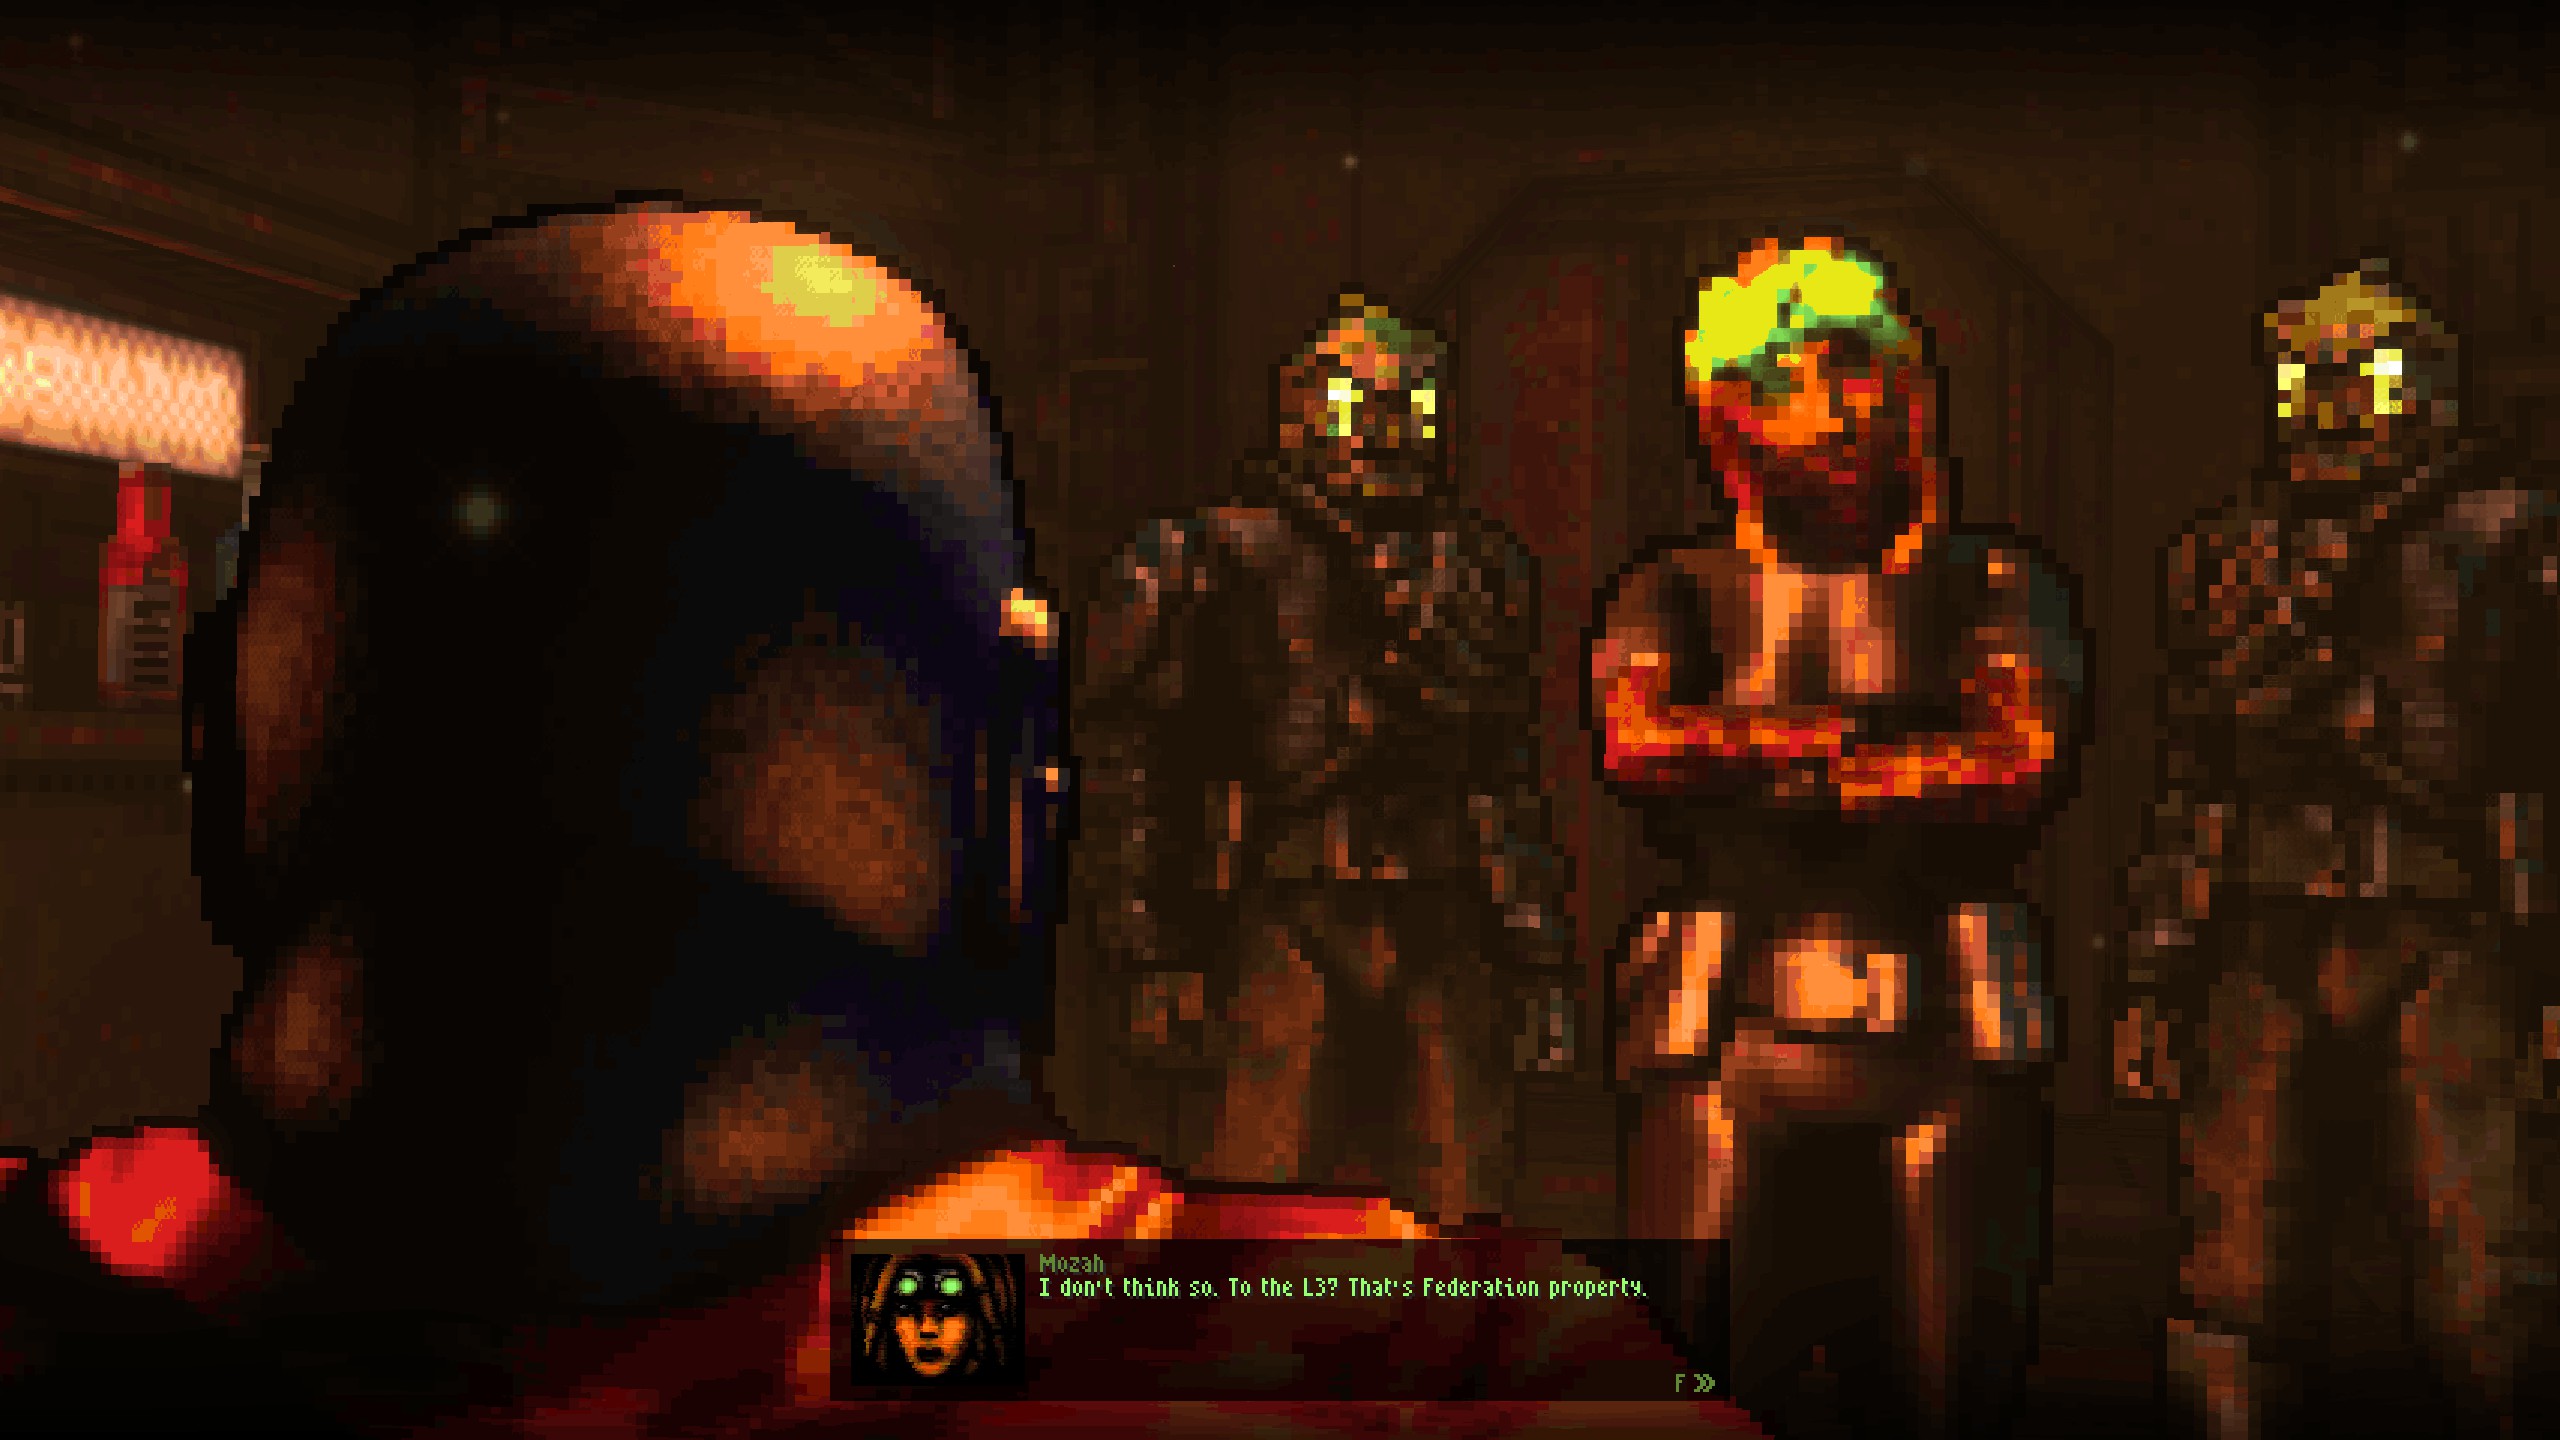 Star Wars-esque view of Mozah negotiating with client, surrounded by guards